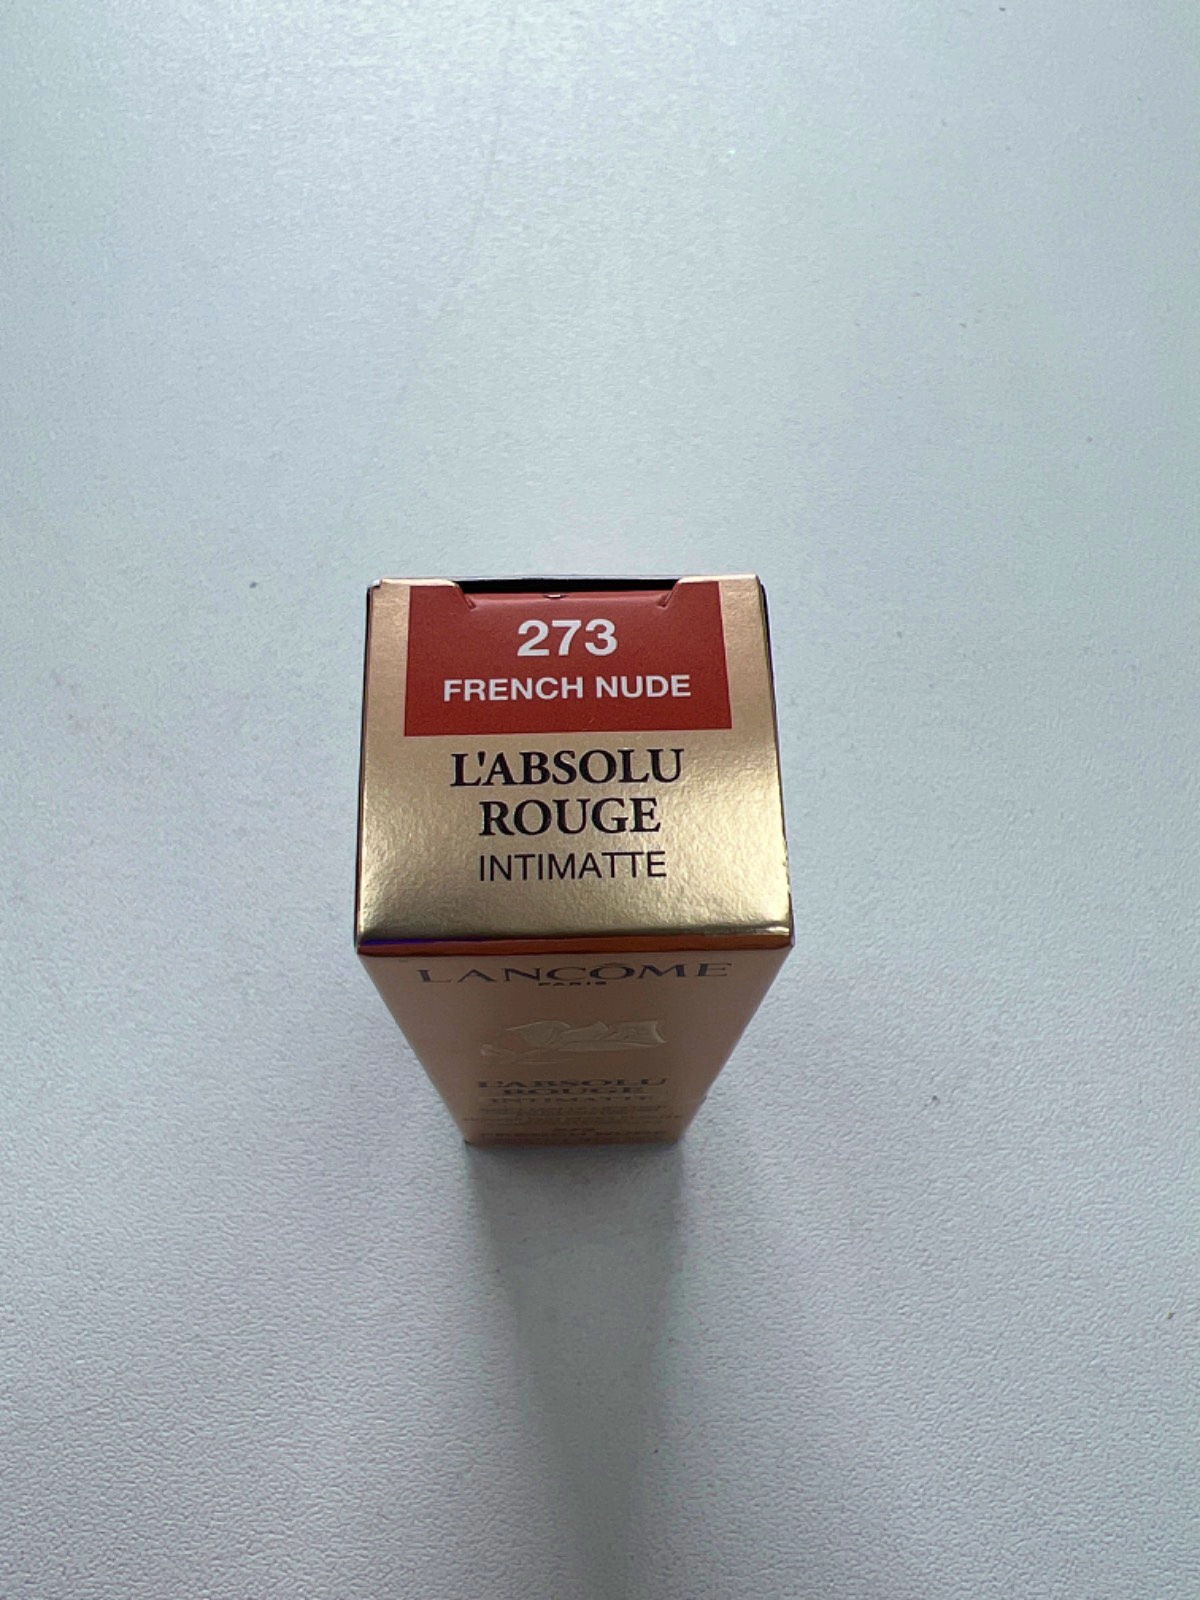 Lancôme L'Absolu Rouge Intimatte Lipstick French Nude 3.4g